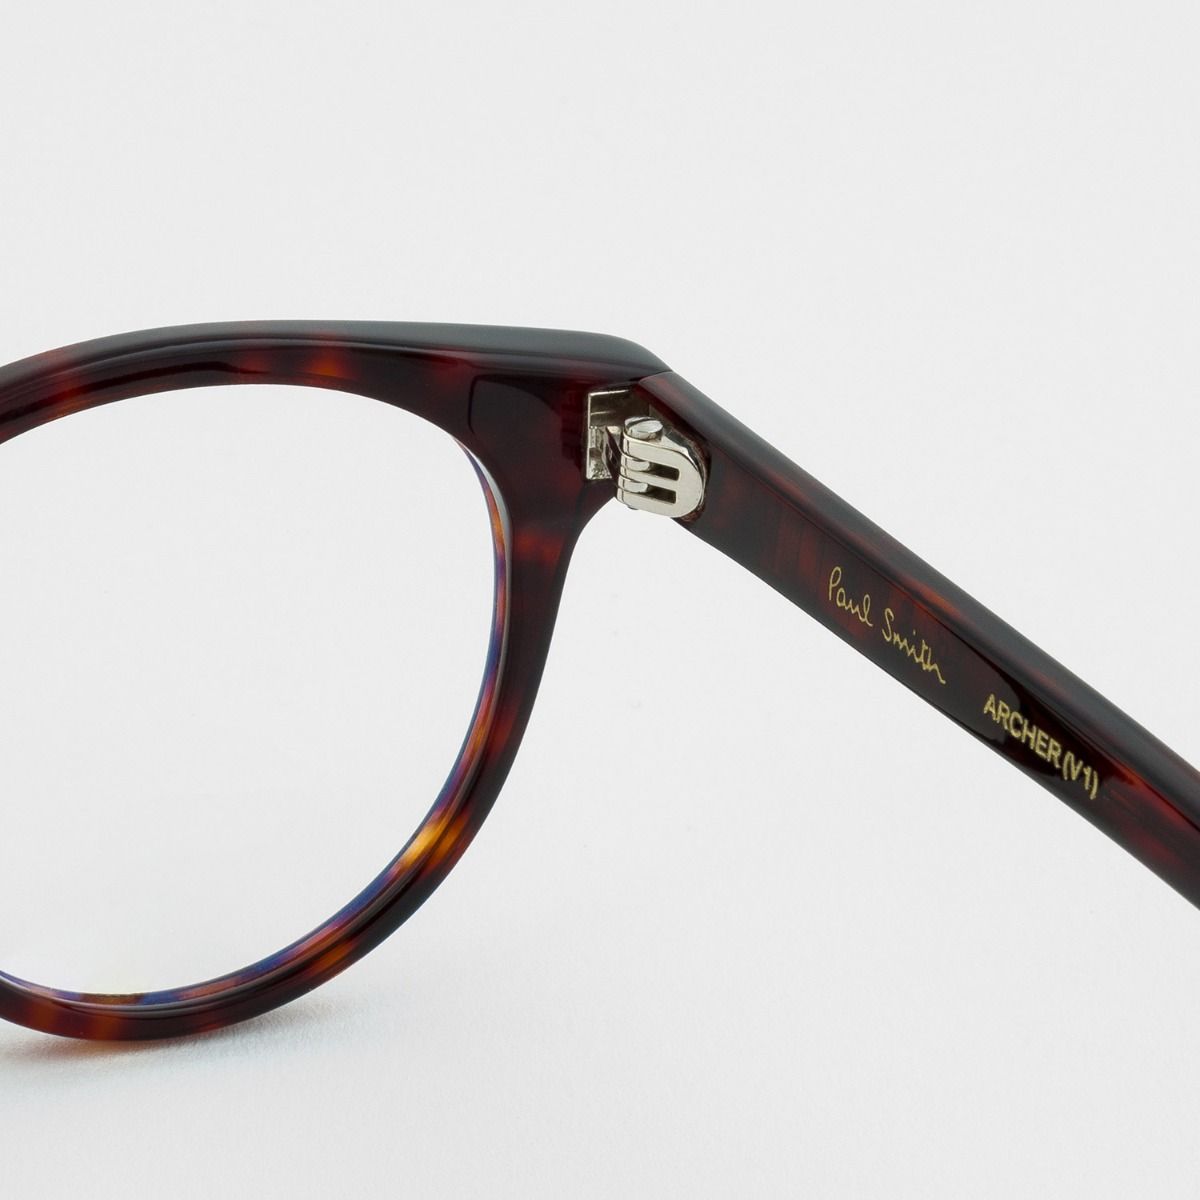 Paul Smith Archer Round Optical Glasses